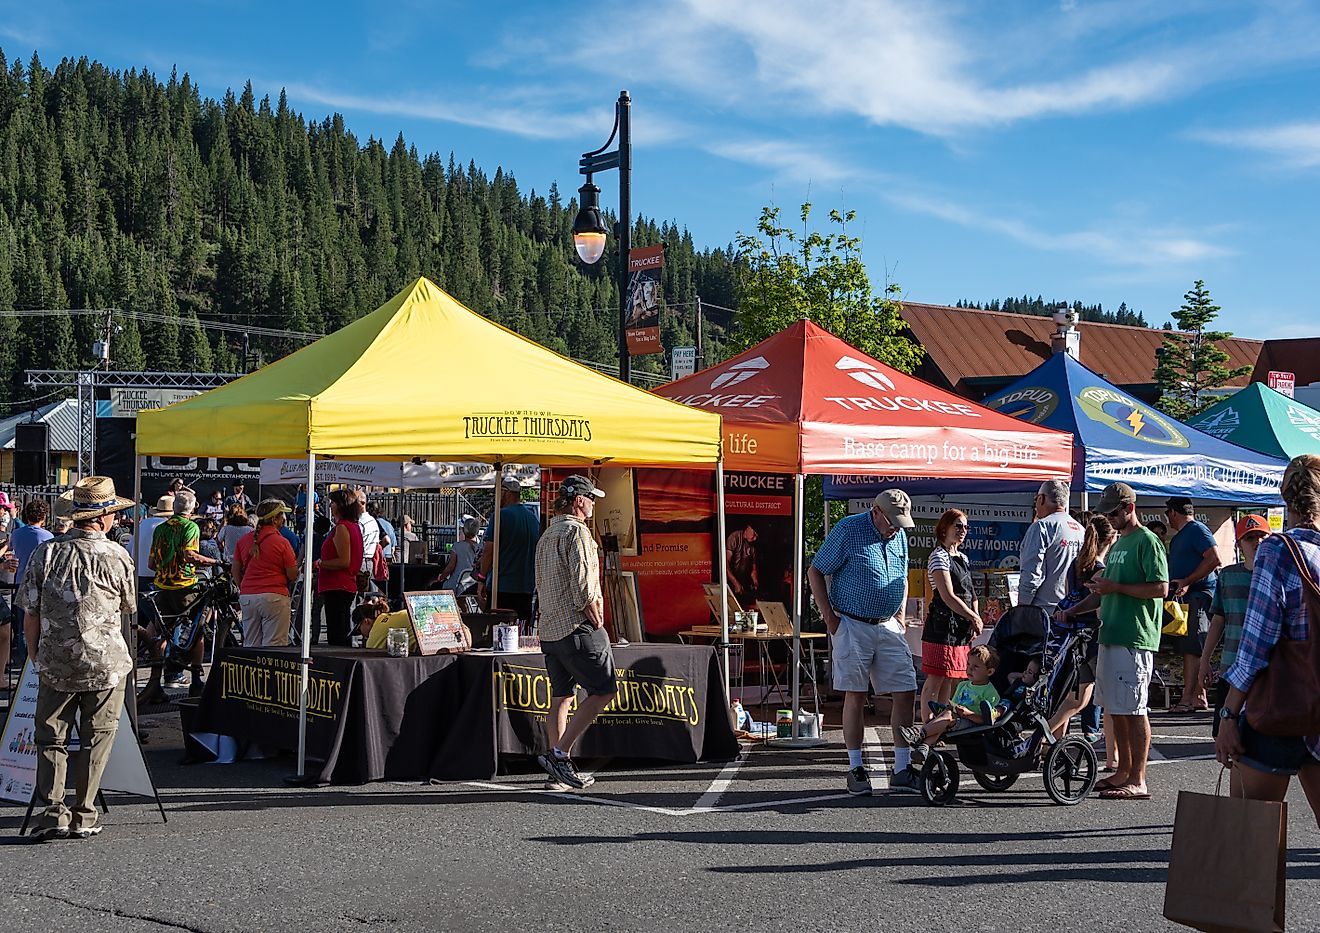 A photo of visitors and various vendors at "Truckee Thursdays," a weekly summer event in Truckee, California, by Chris Allan / Shutterstock.com